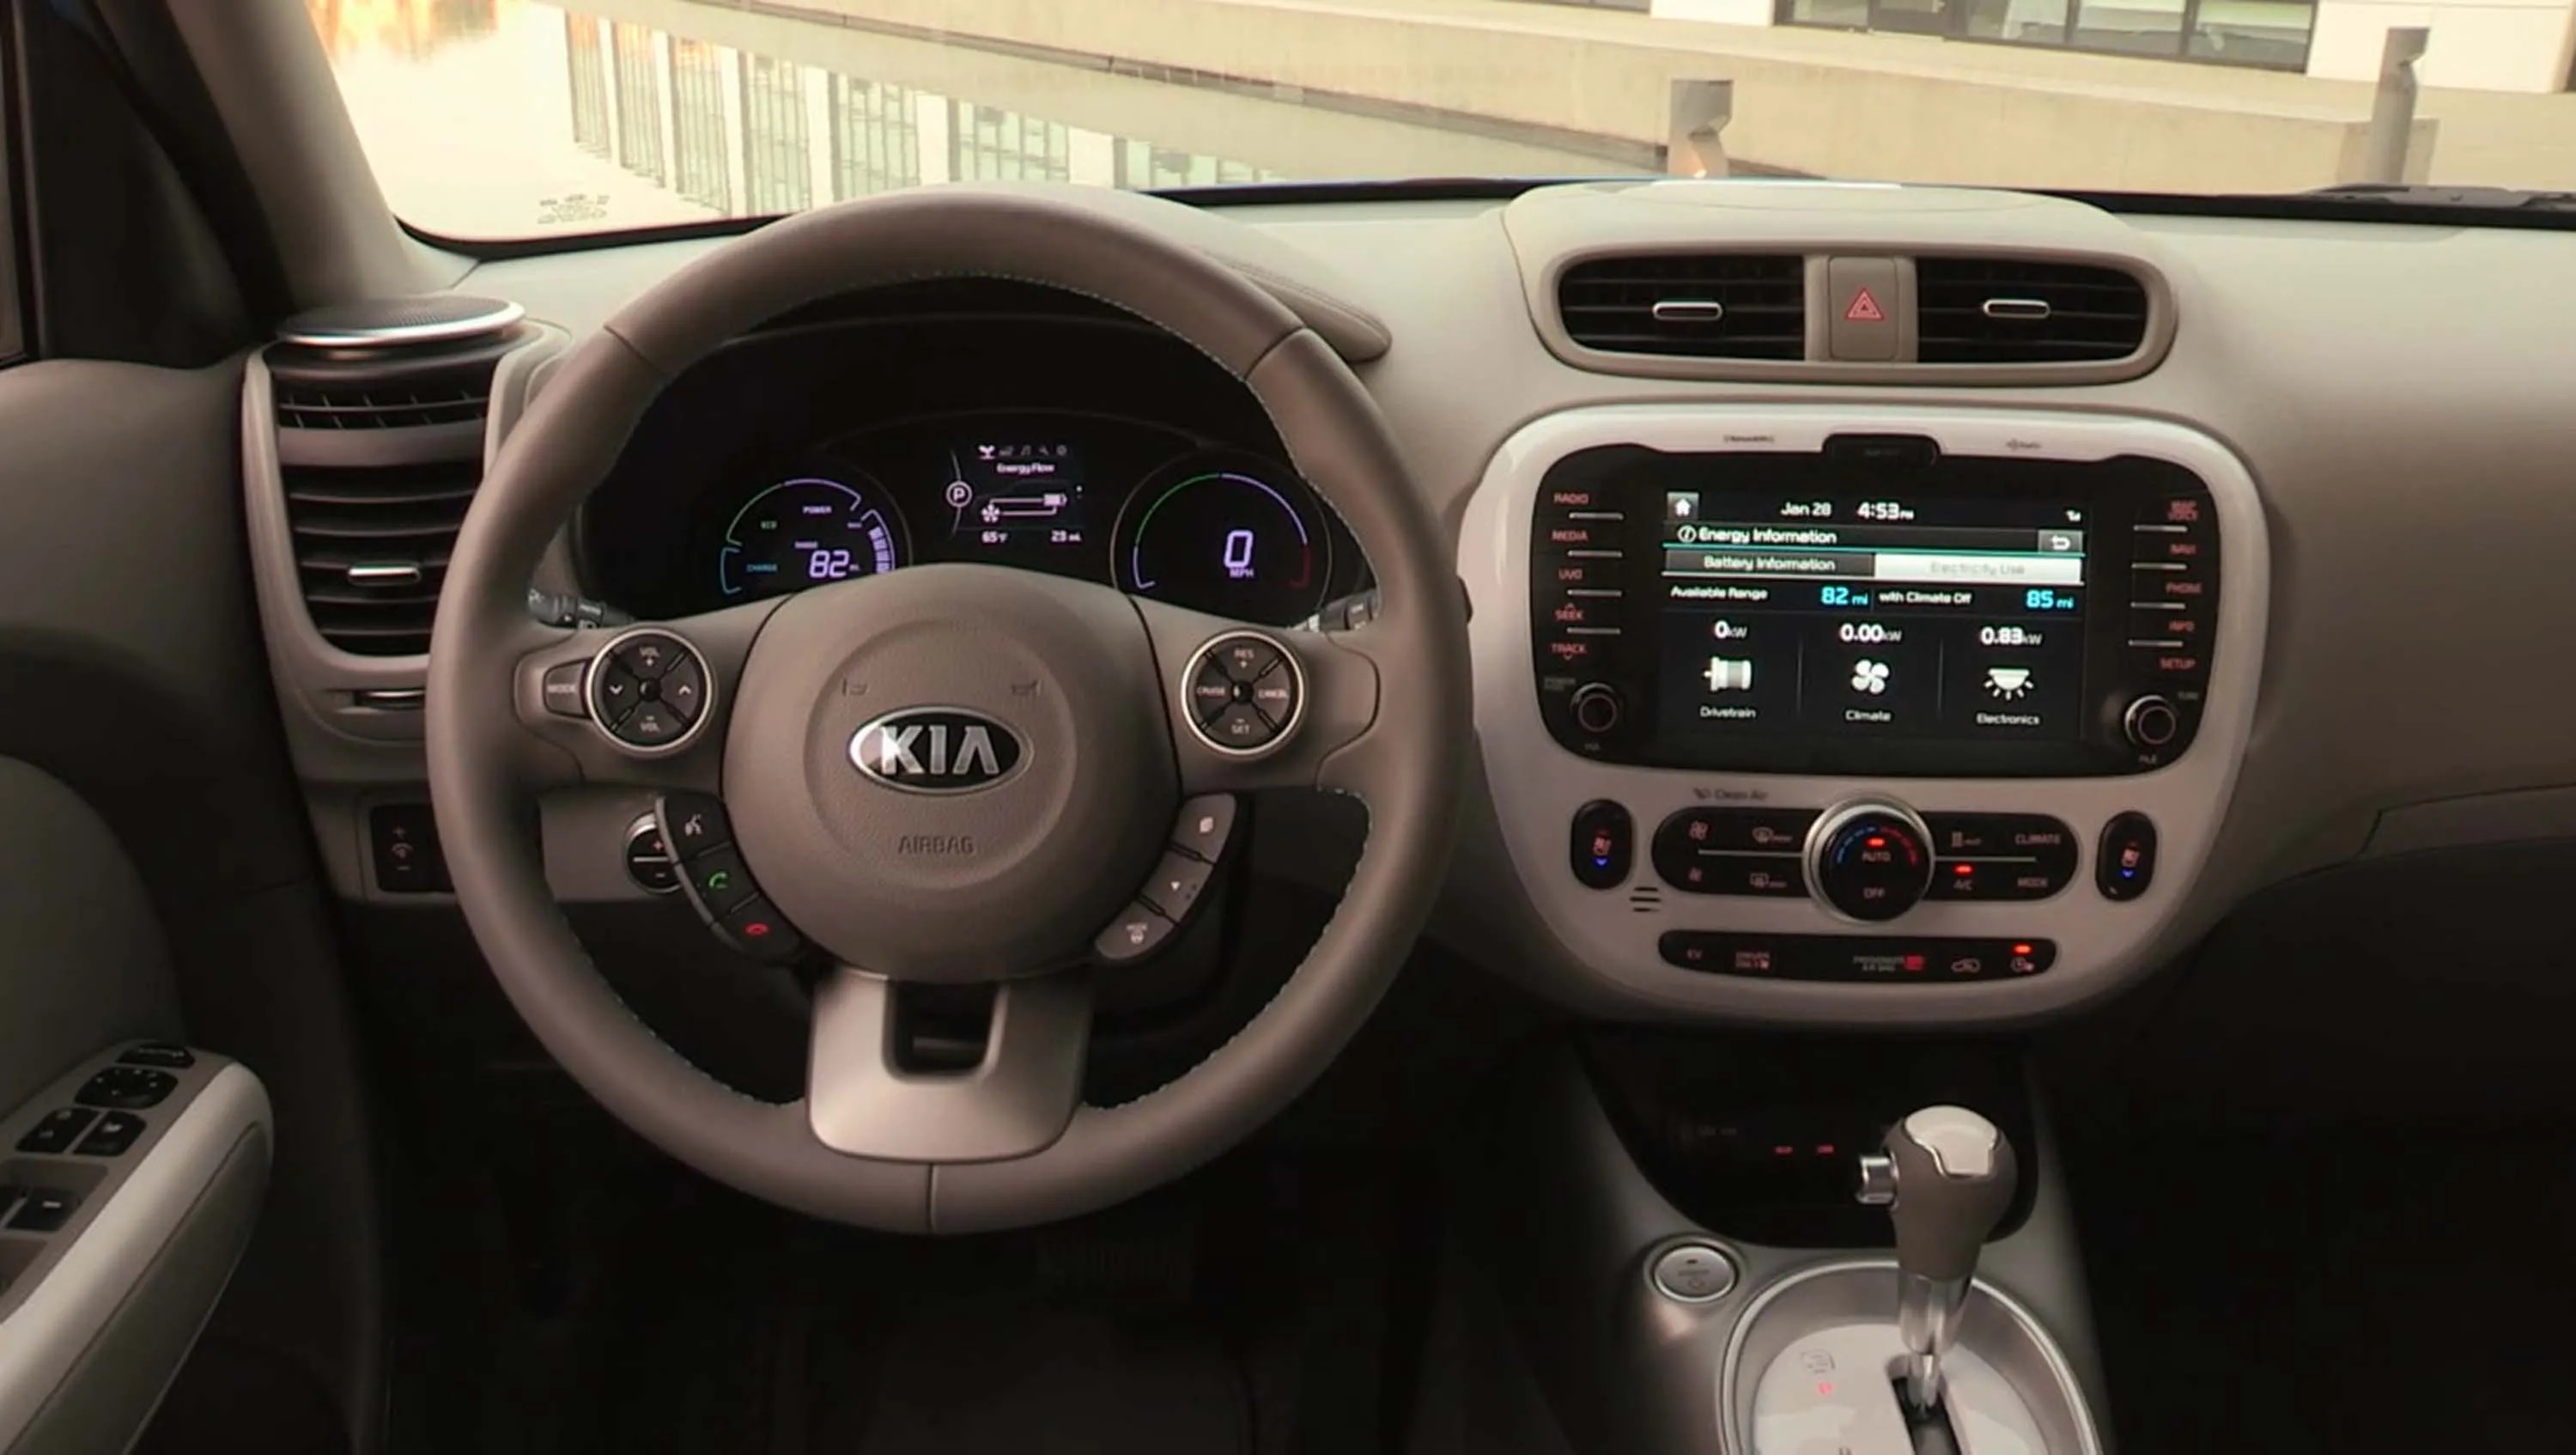 The current trend: Kia Soul goes electric for 2015